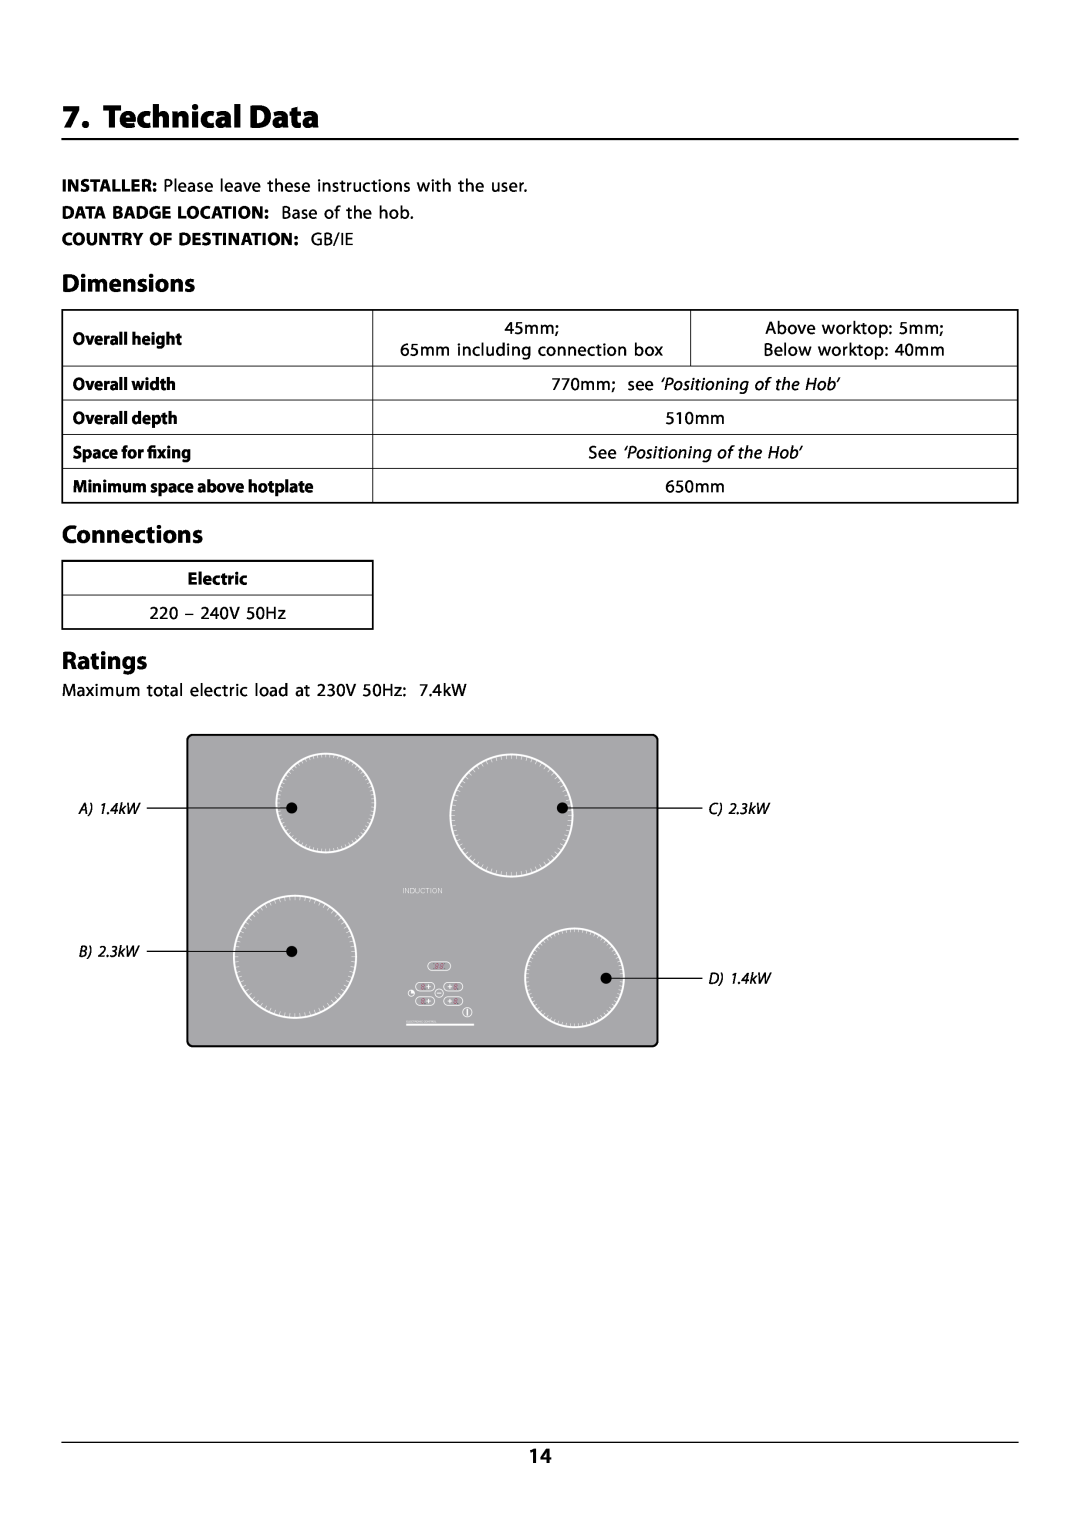 Rangemaster Technical Data, Dimensions, Connections, Ratings, DocNo.103-0002- Technical data - RI77 hob, Overall height 